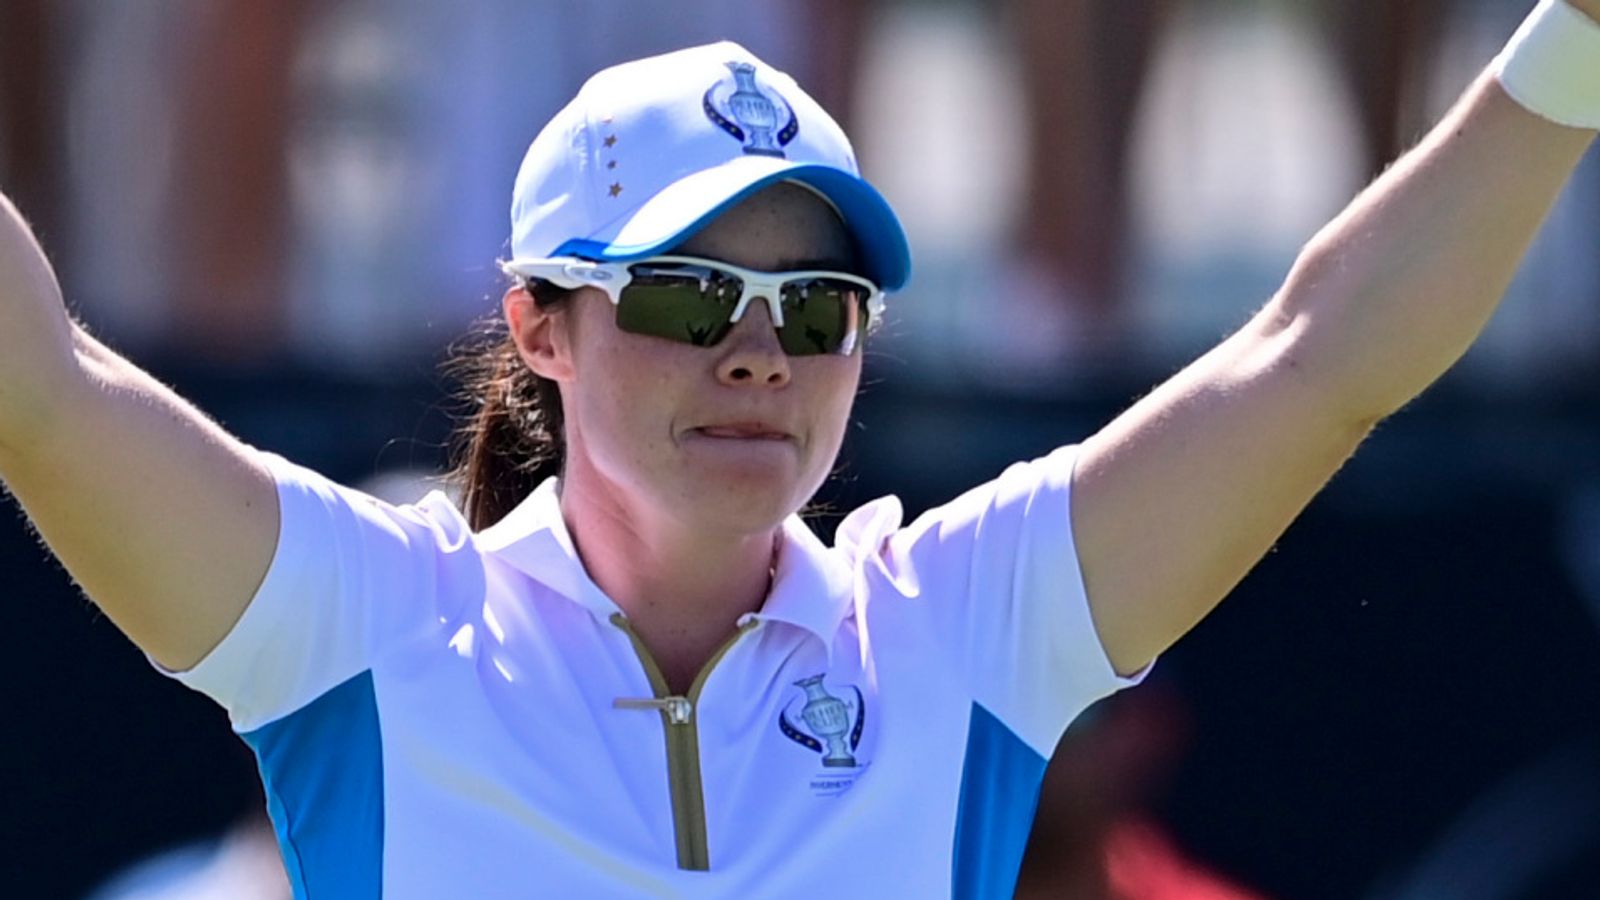 Solheim Cup: Leona Maguire says her week could not have been better as Europe retain the trophy